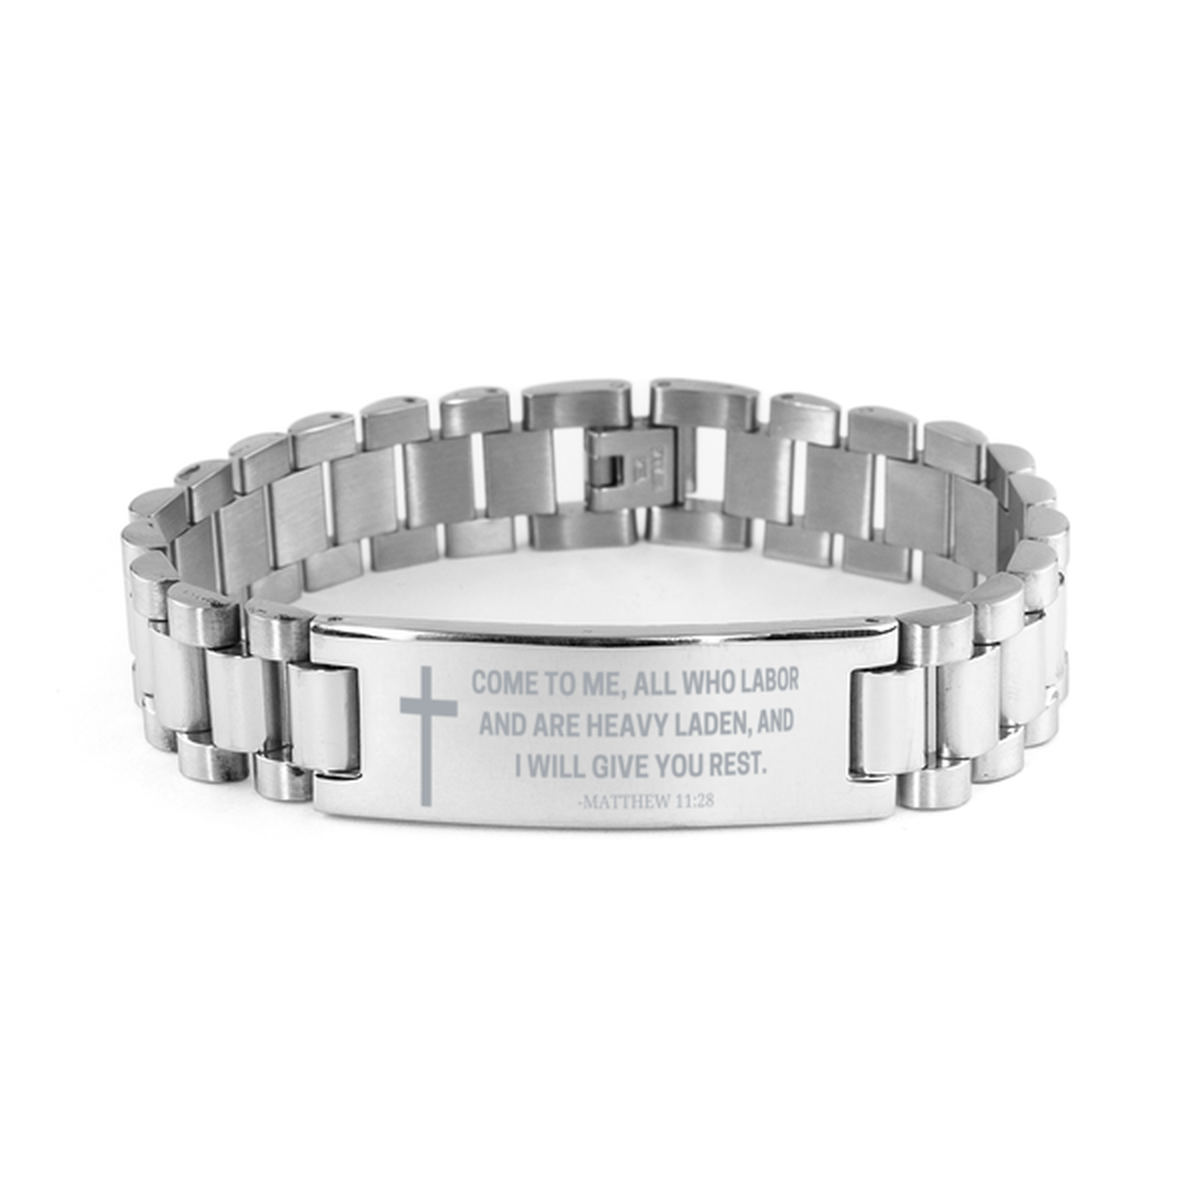 Baptism Gifts For Teenage Boys Girls, Christian Bible Verse Ladder Stainless Steel Bracelet, Come to me, all who labor, Catholic Confirmation Gifts for Son, Godson, Grandson, Nephew